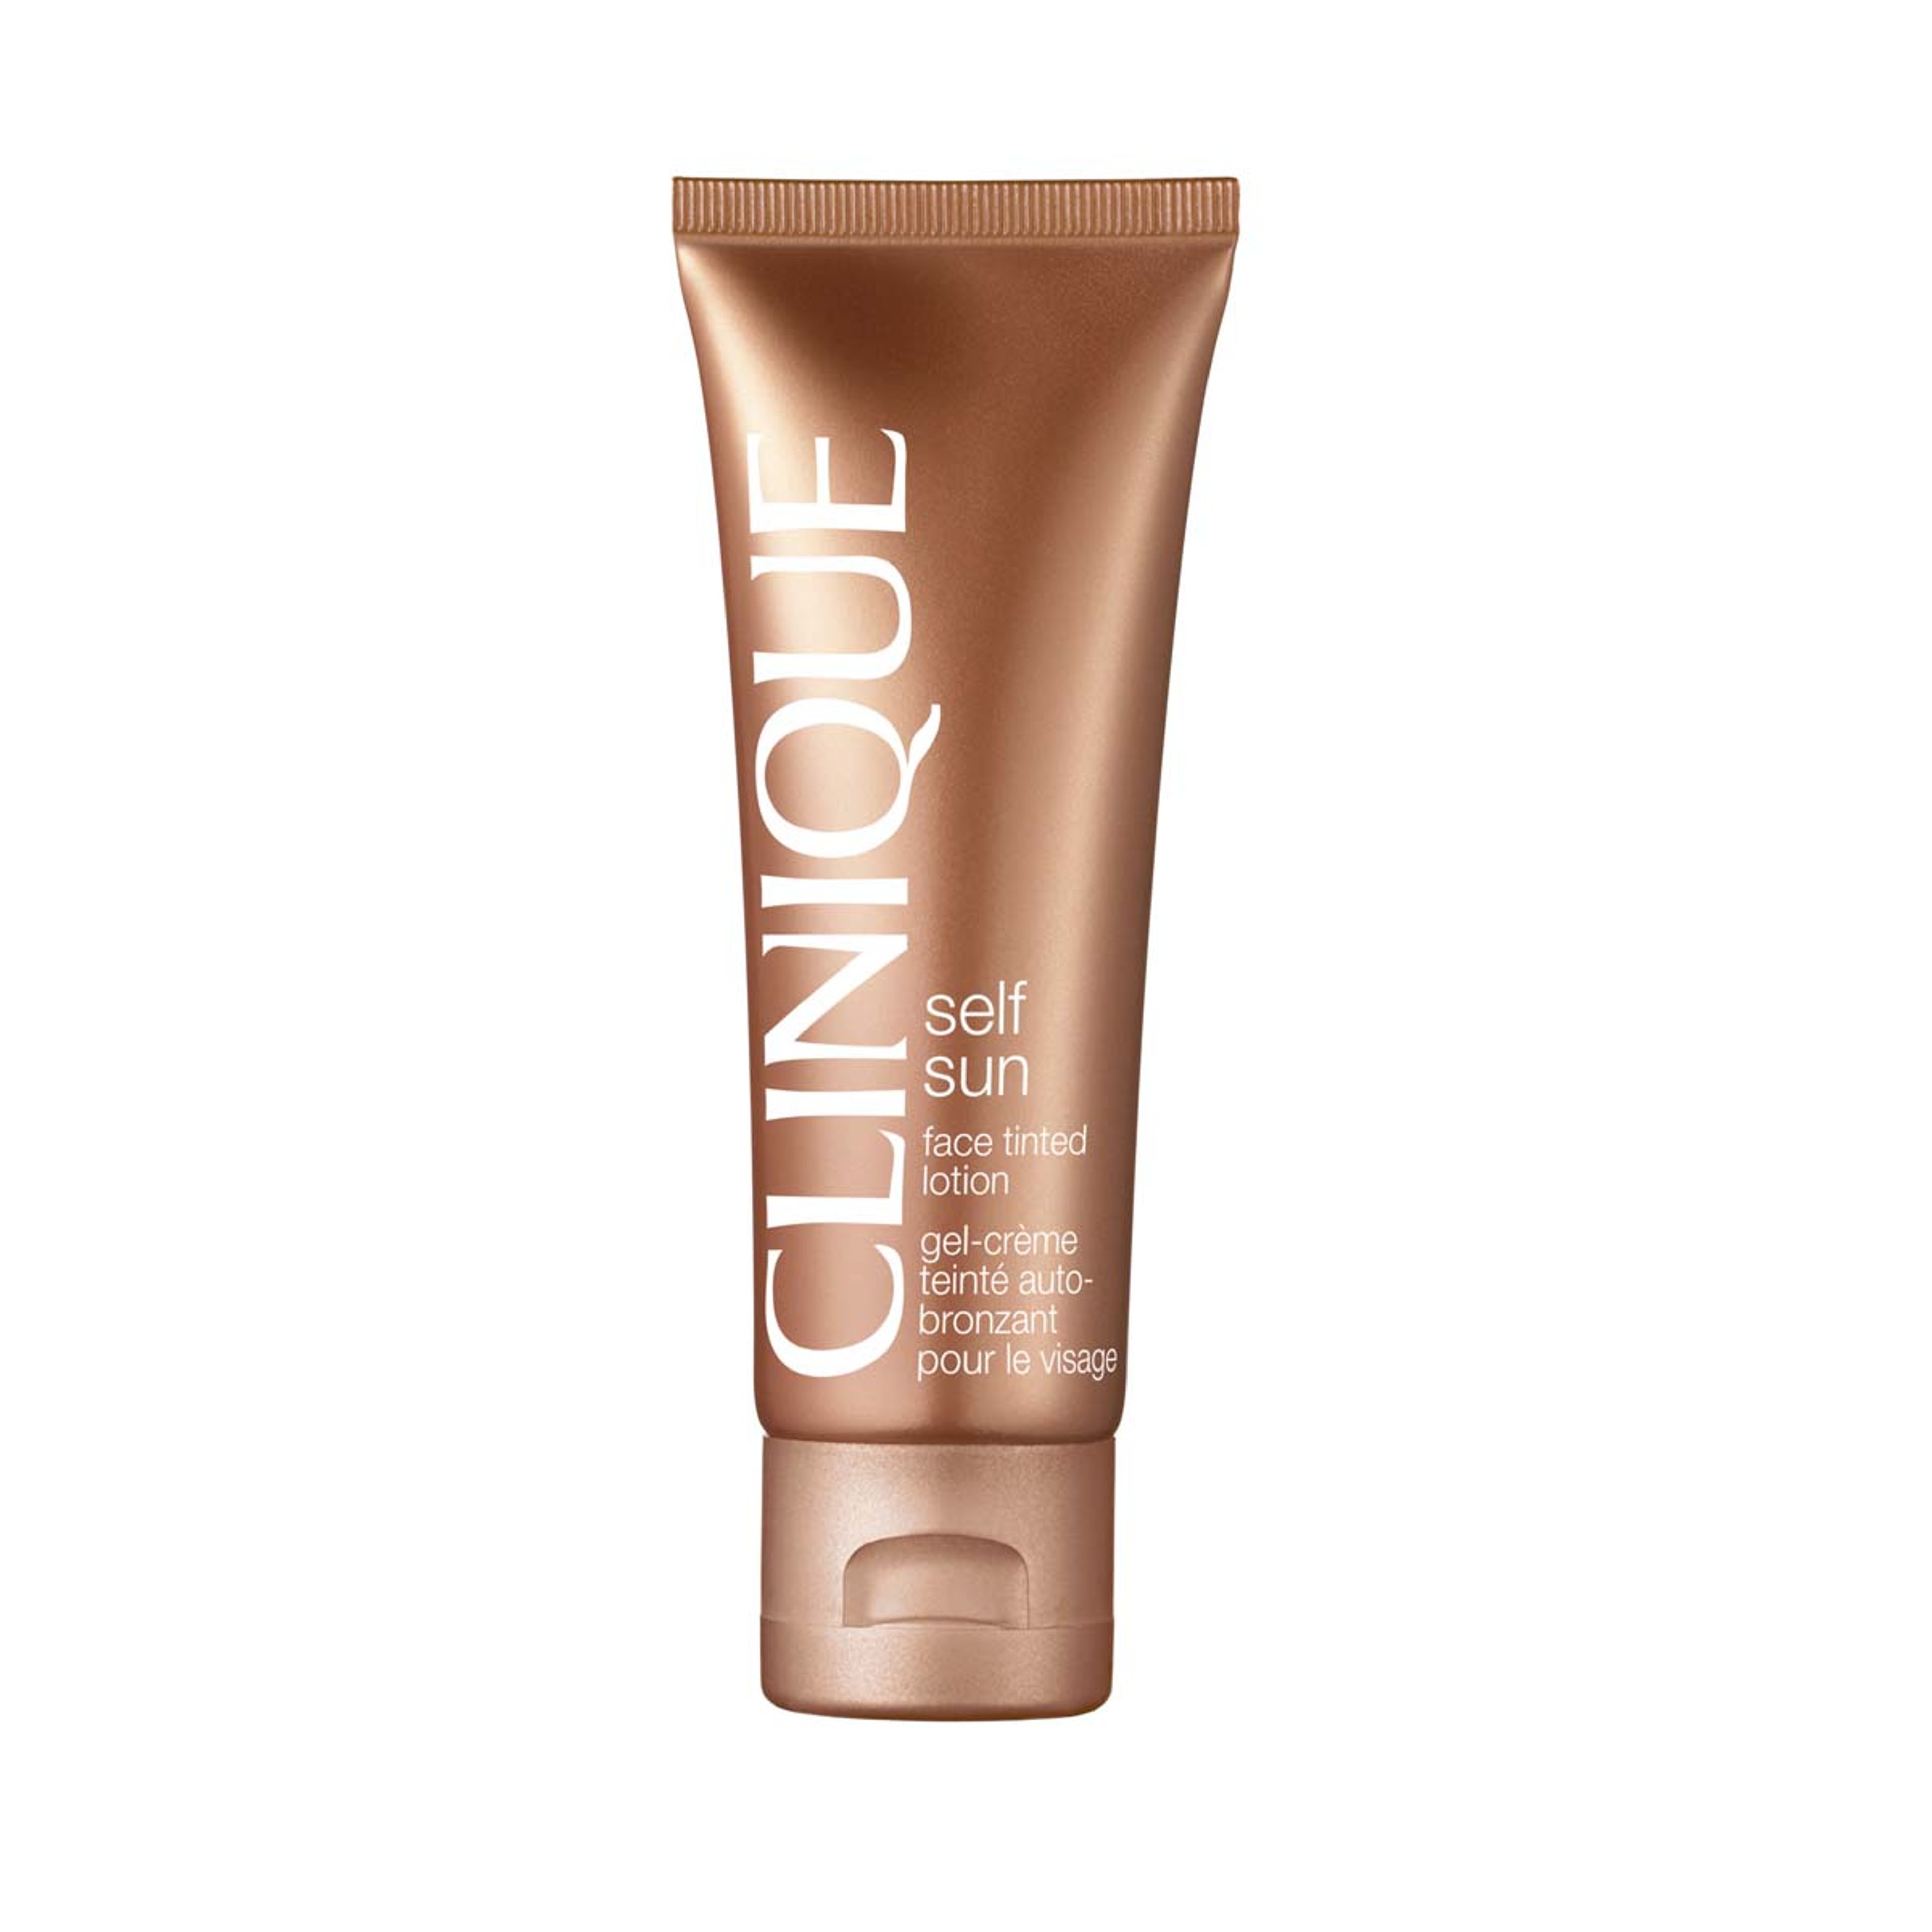 Clinique Face Tinted Lotion 1